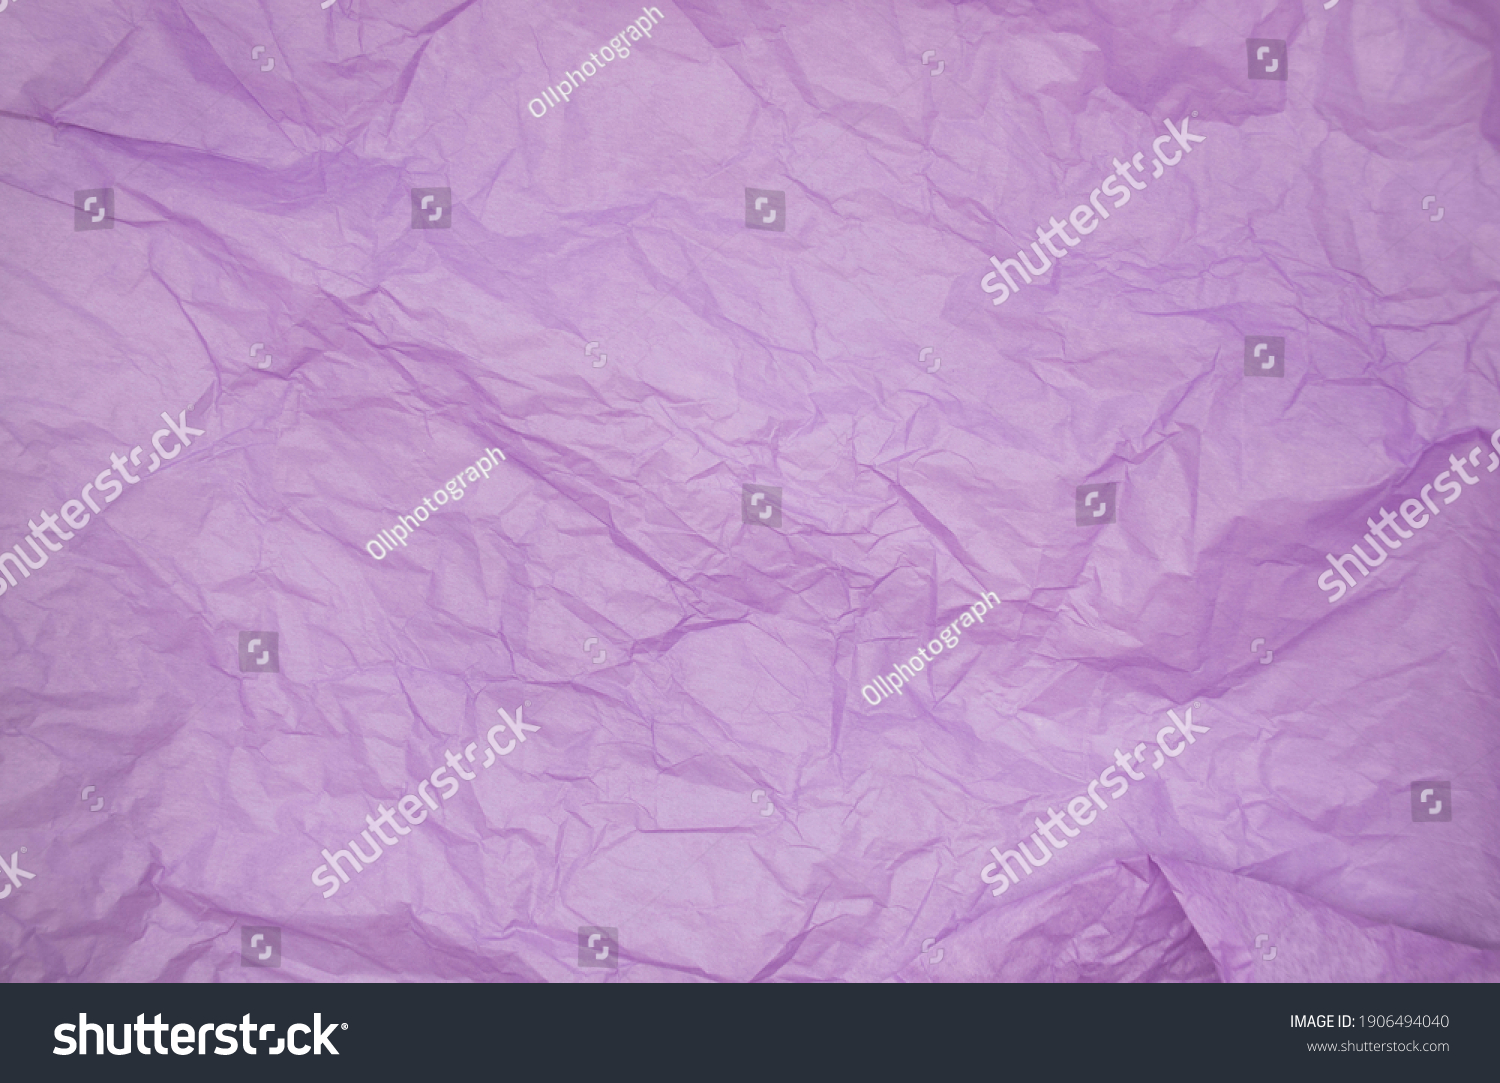 purple color creased paper tissue background texture. wrinkled tissue paper texture #1906494040